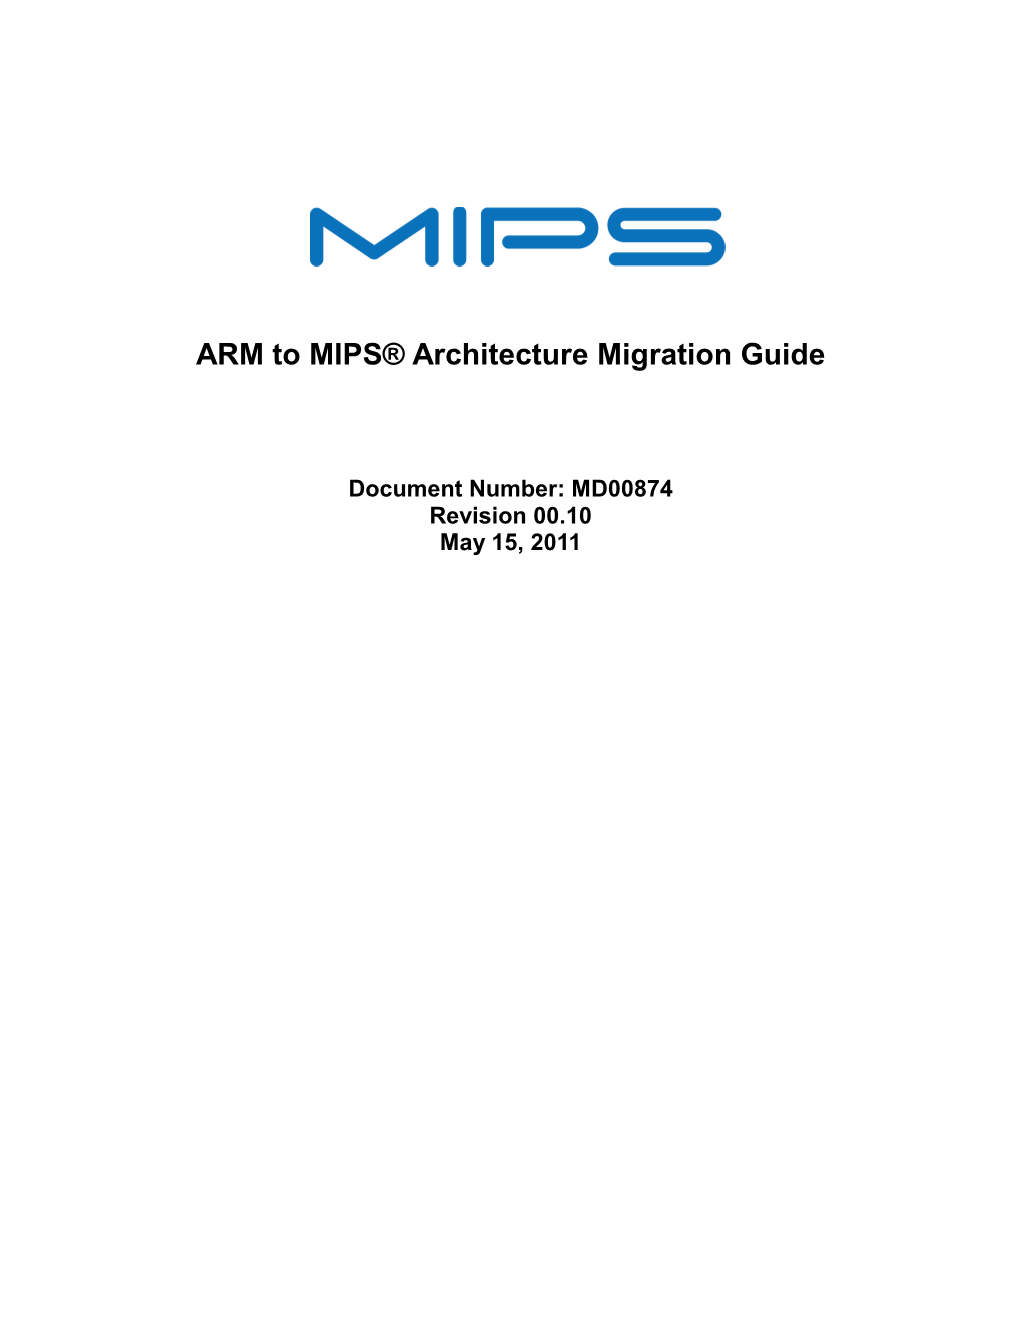 ARM to MIPS® Architecture Migration Guide